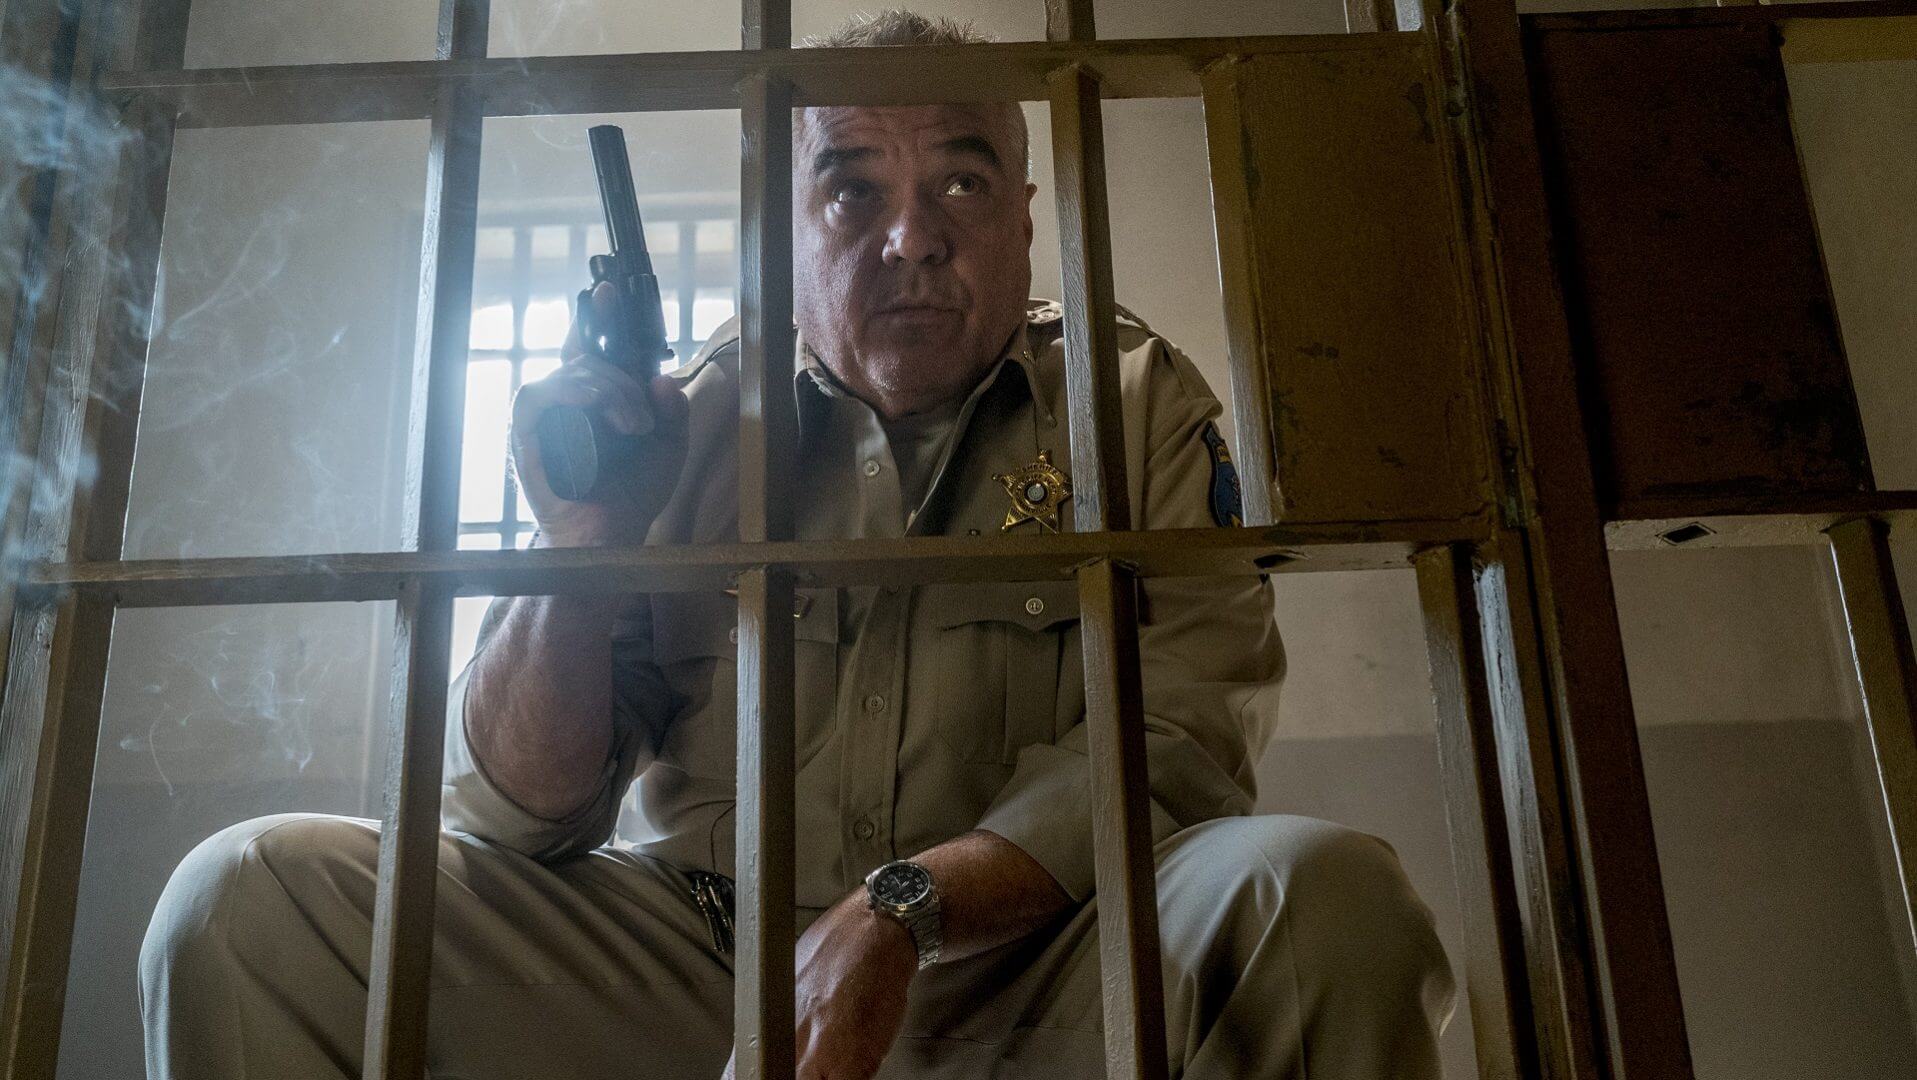 Sheriff Root in Preacher sitting with revolver drawn